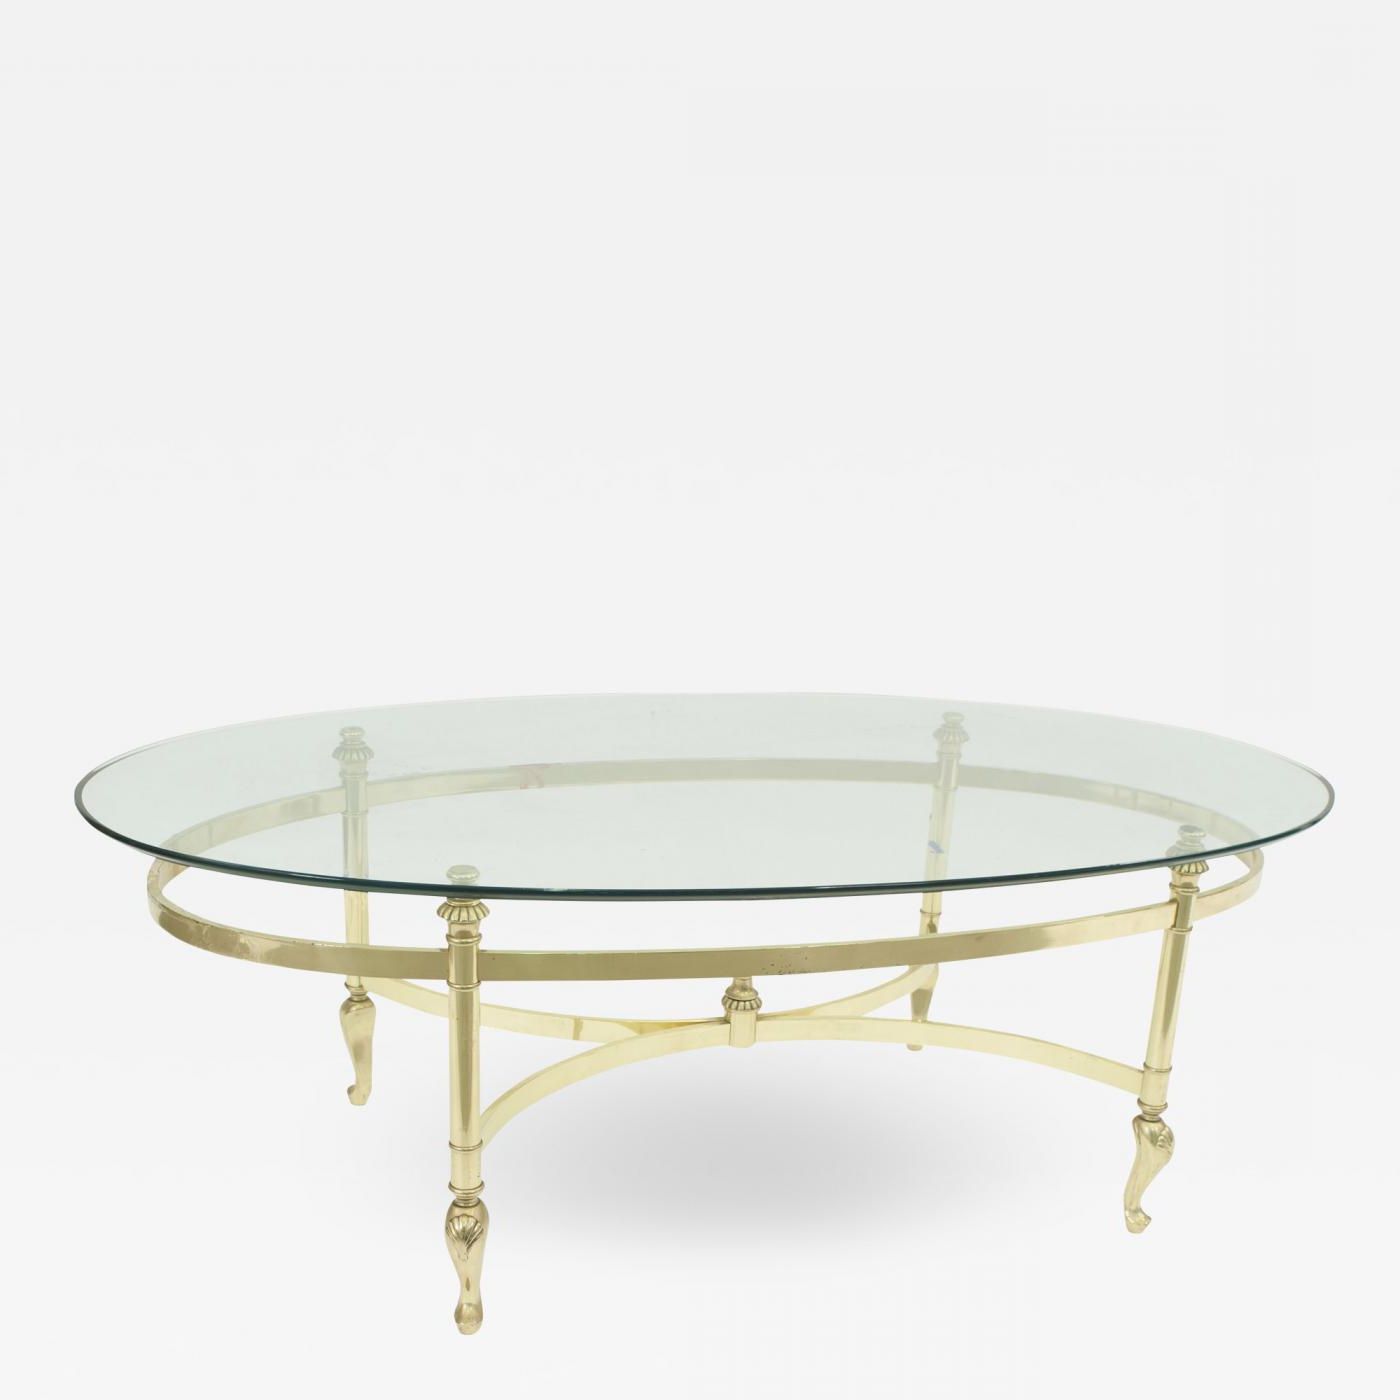 Contemporary Oval Brass And Glass Coffee Table Pertaining To Widely Used Glass And Gold Oval Coffee Tables (View 15 of 20)